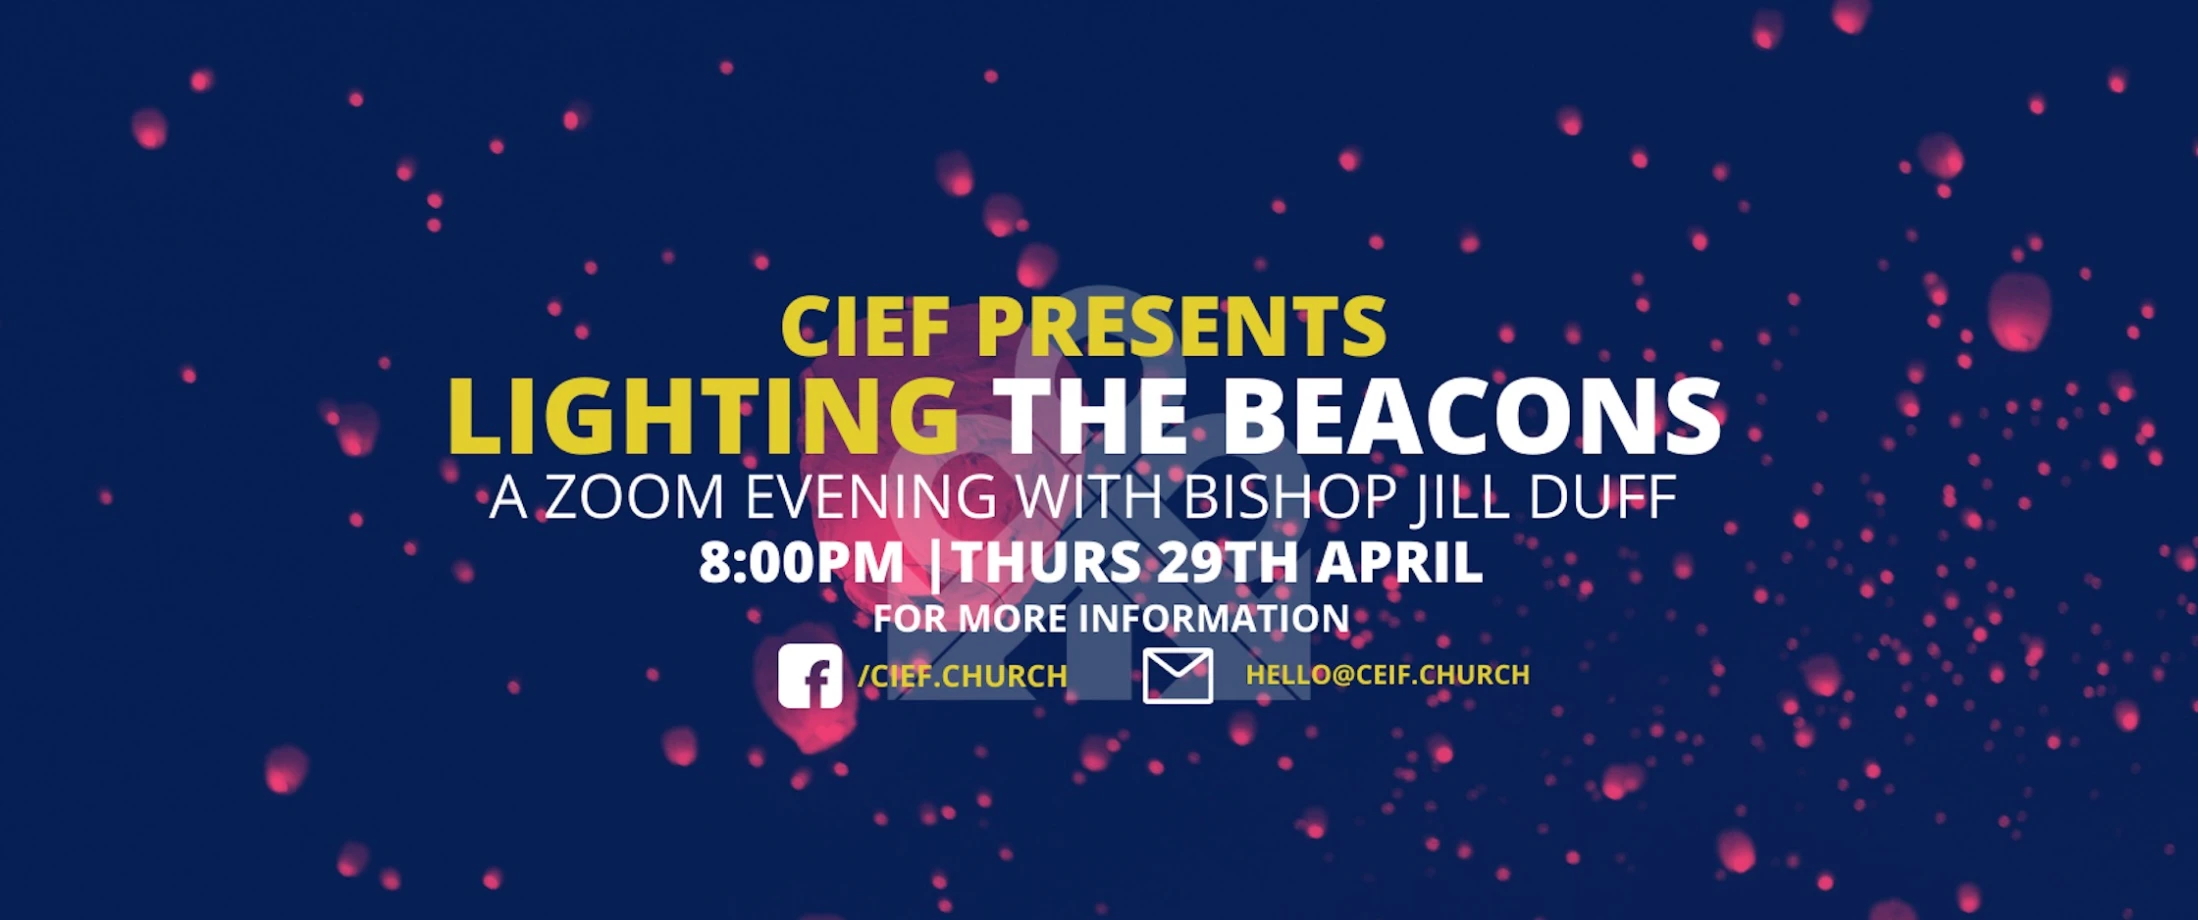 An evening with Bishop Jill Duff